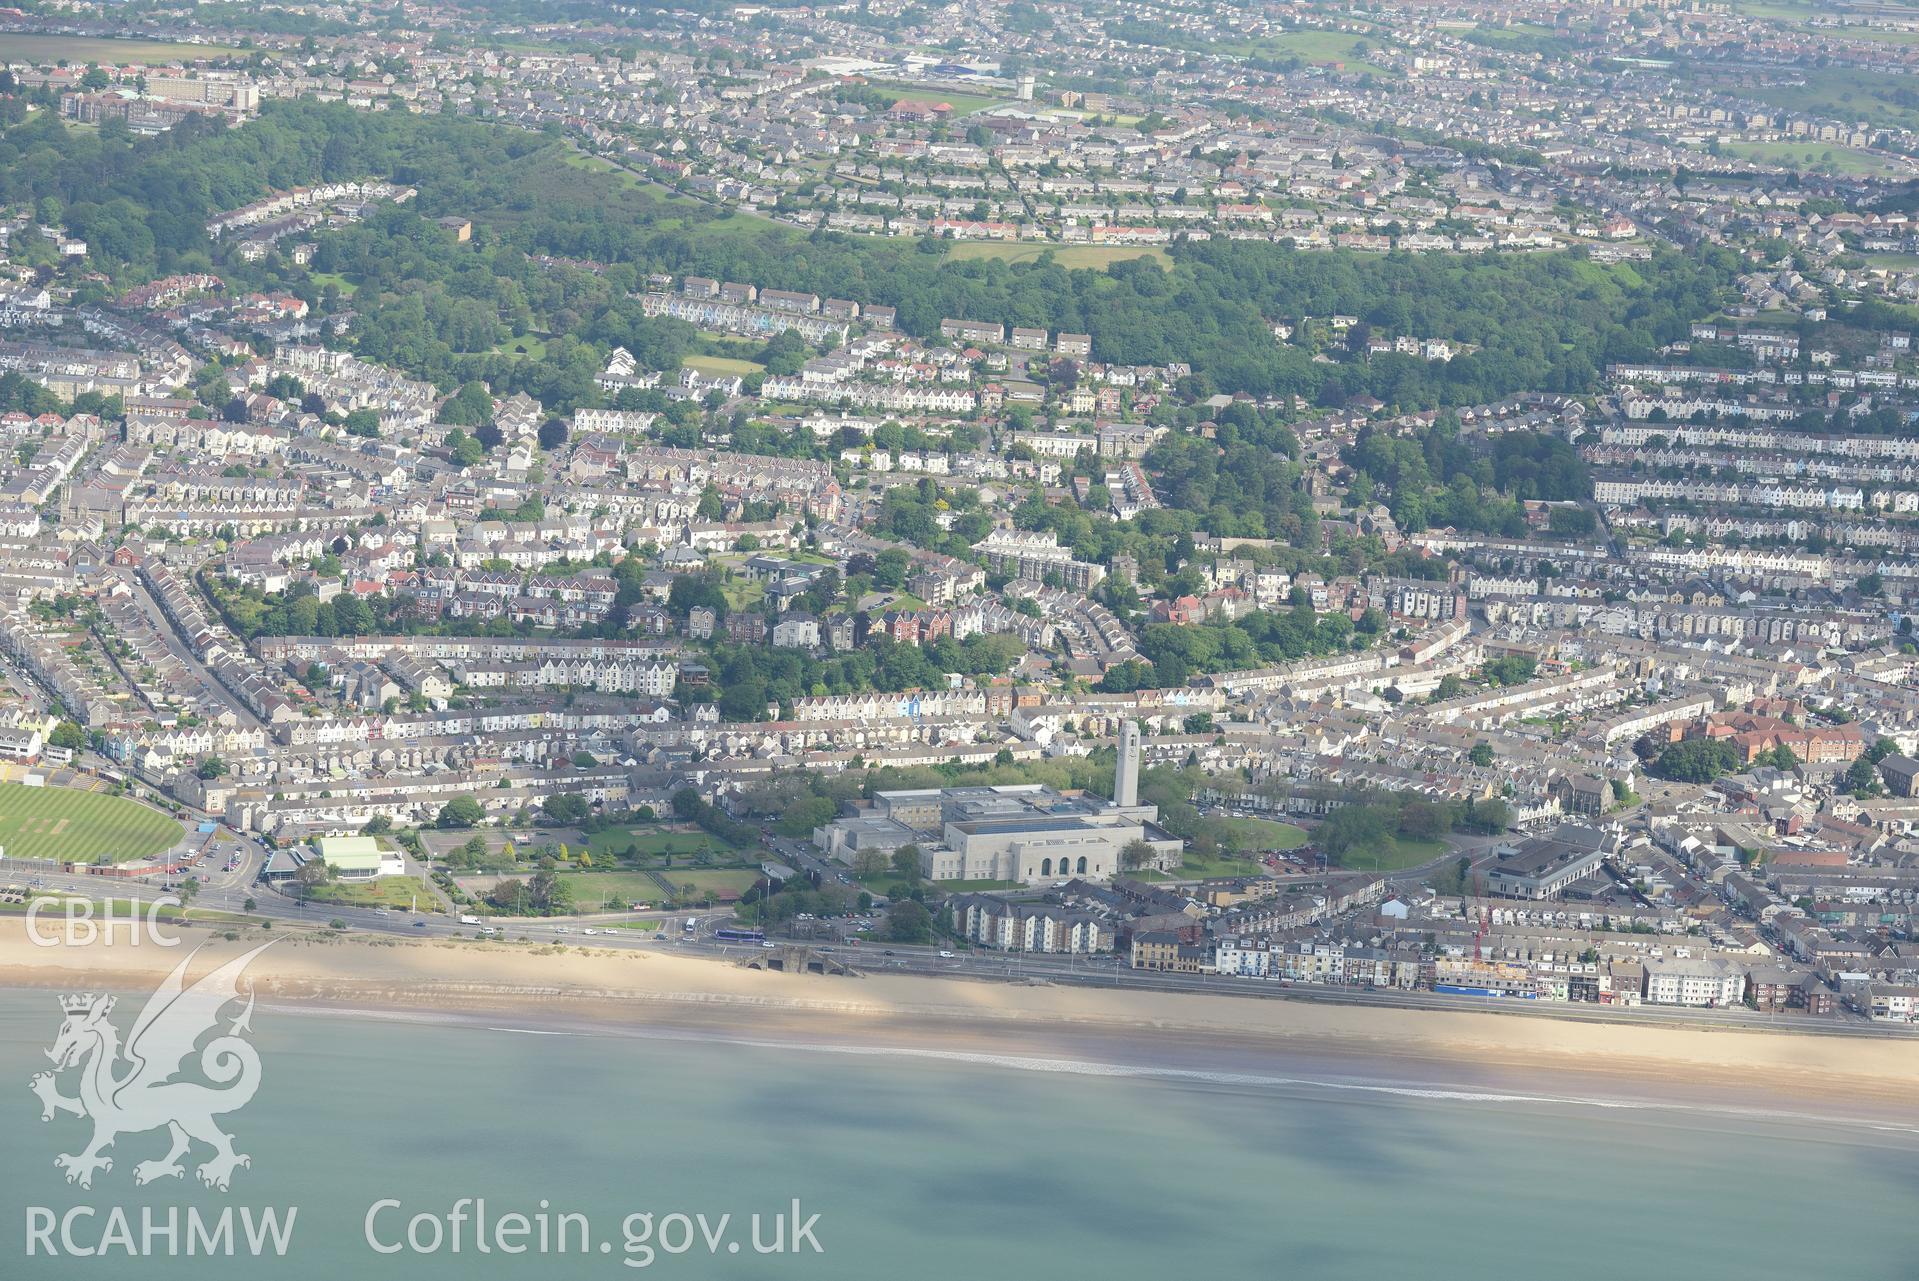 Guildhall, Victoria Park, Patti Pavilion and St. Helen's Cricket and Rugby Ground, taken from Swansea Bay. Oblique aerial photograph taken during the Royal Commission's programme of archaeological aerial reconnaissance by Toby Driver on 19th June 2015.